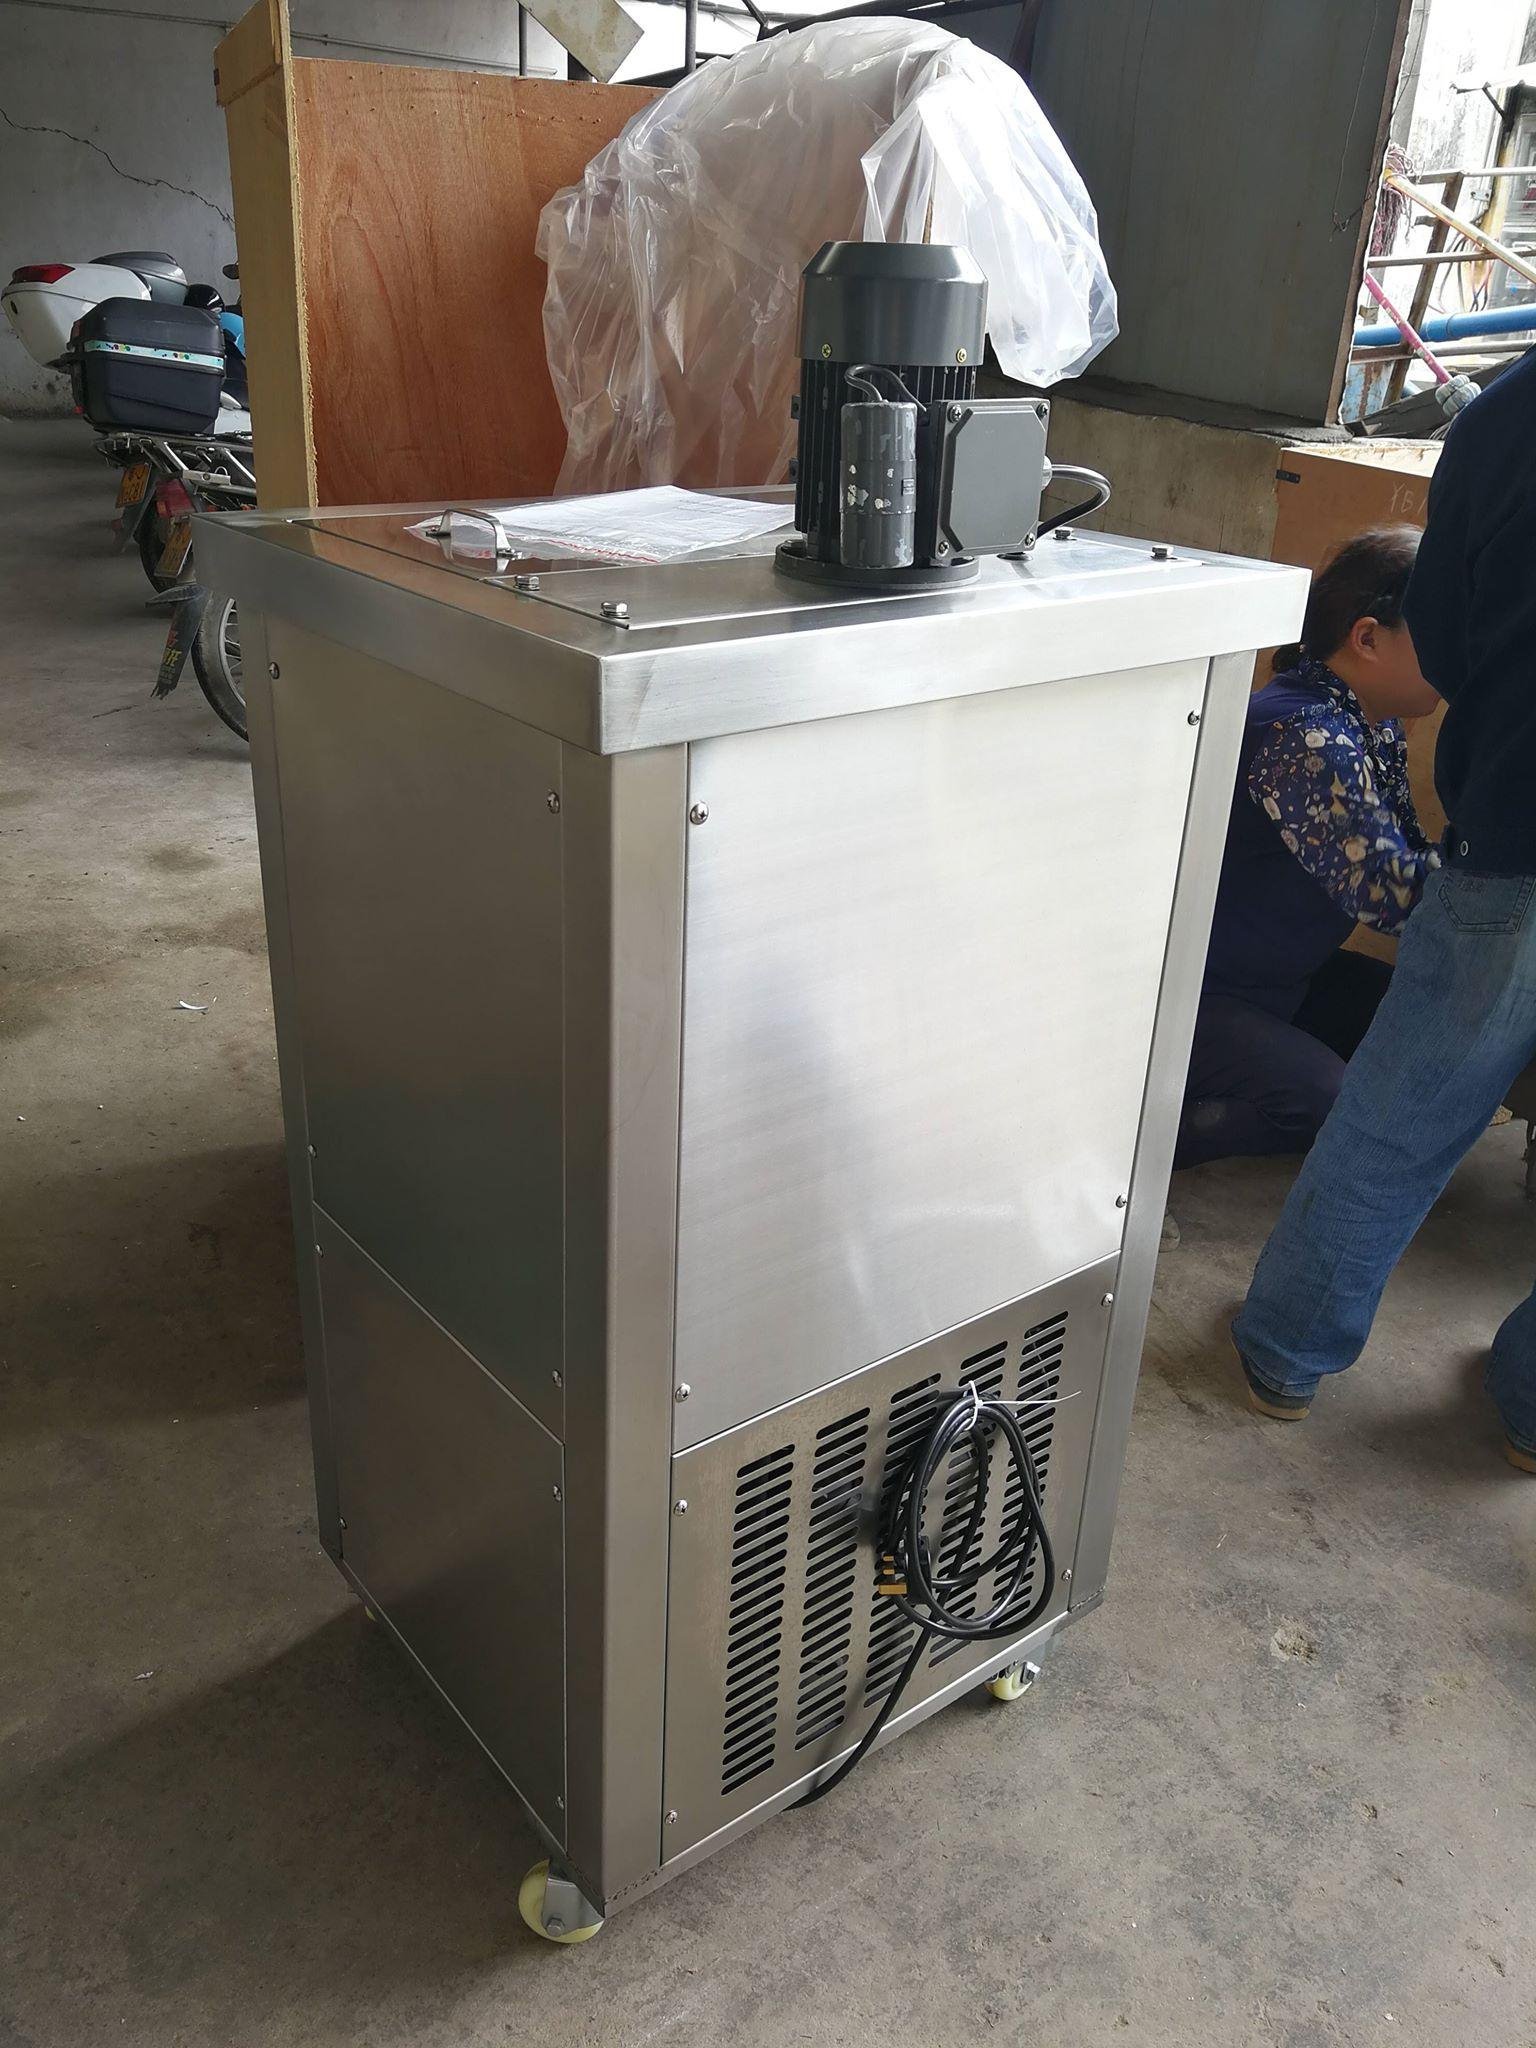 1 Mold Basket Commercial Manual Ice Lolly Machine Price